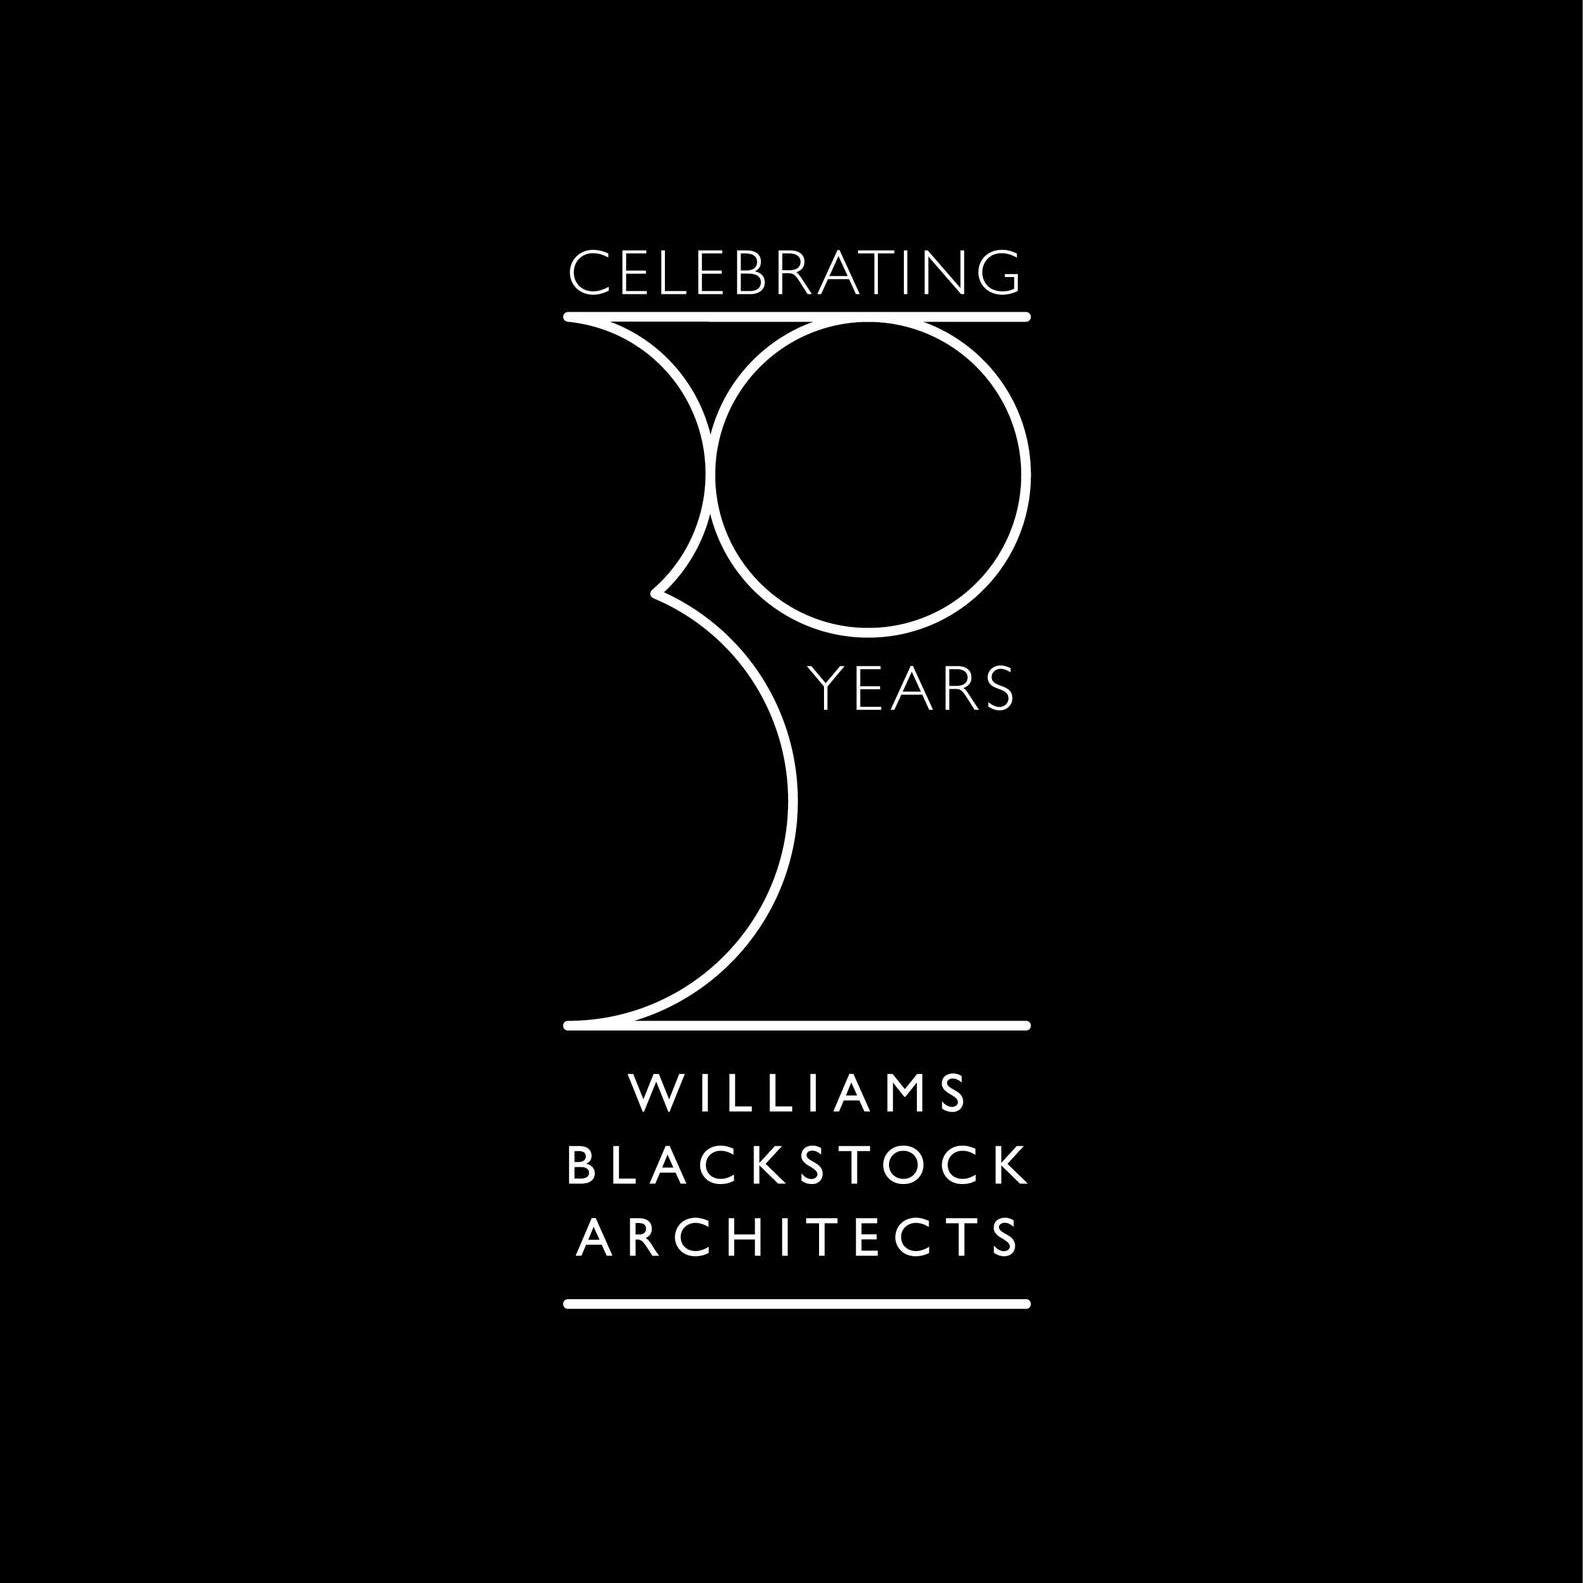 Celebrating three decades of design.

This year our firm celebrates three decades of award-winning design.  Building on the richness of our past and our journey of growth, we are excited about the bright future ahead and we look to continue creative 